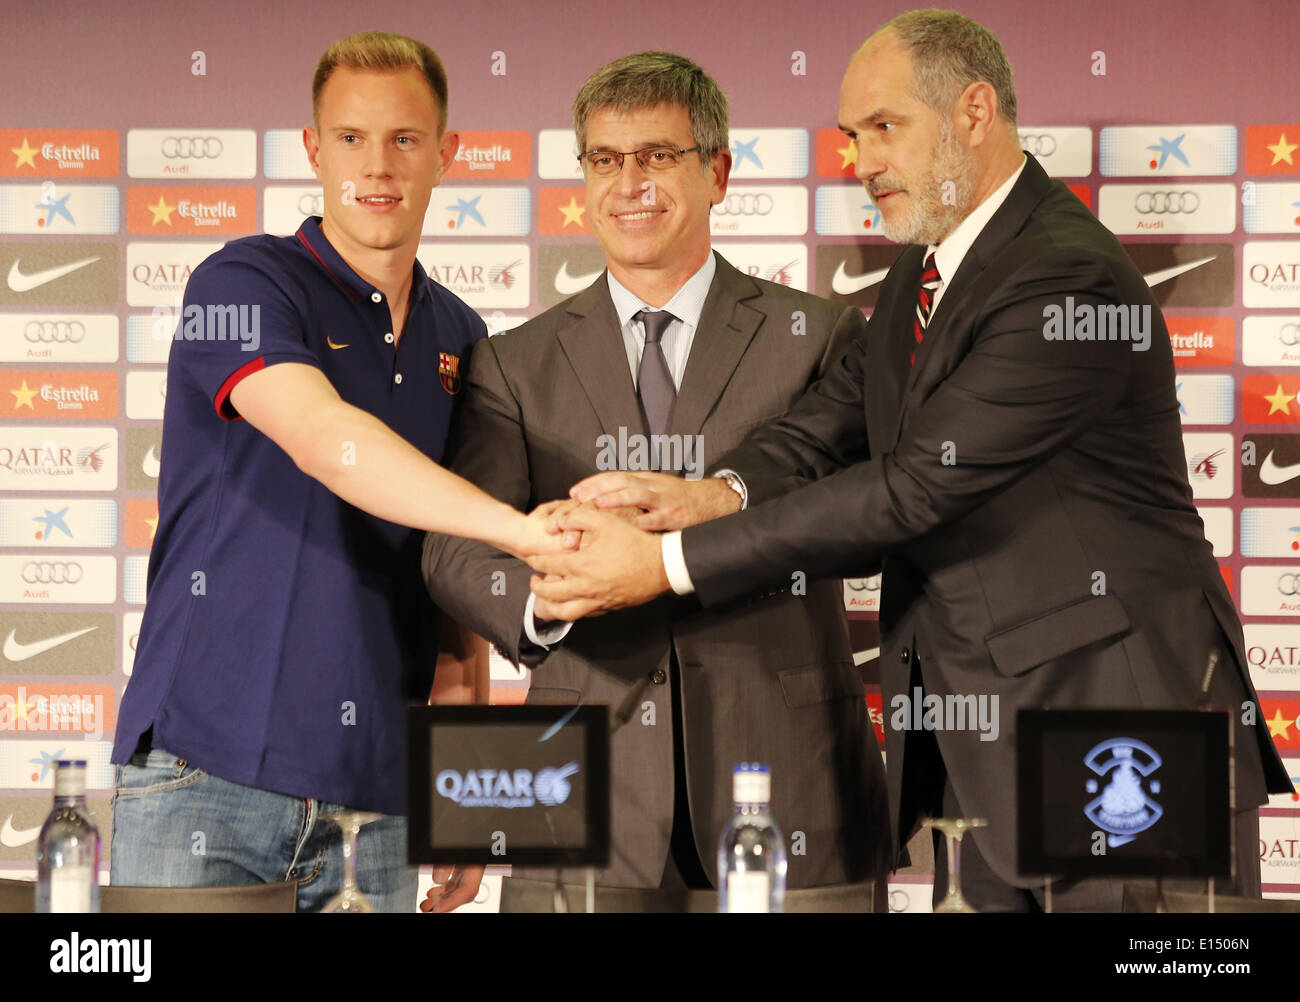 Barcelona, Spain. 22nd May, 2014. the goalkeeper with the vicepresident Jordi Mestre and Andoni Zubizarreta during the presentation of Ter Stegen, new player of FC Barcelona, in the offices of the club, May 22, 2014. Photo: Joan Valls/Urbanandsport/Nurphoto. © Joan Valls/NurPhoto/ZUMAPRESS.com/Alamy Live News Stock Photo